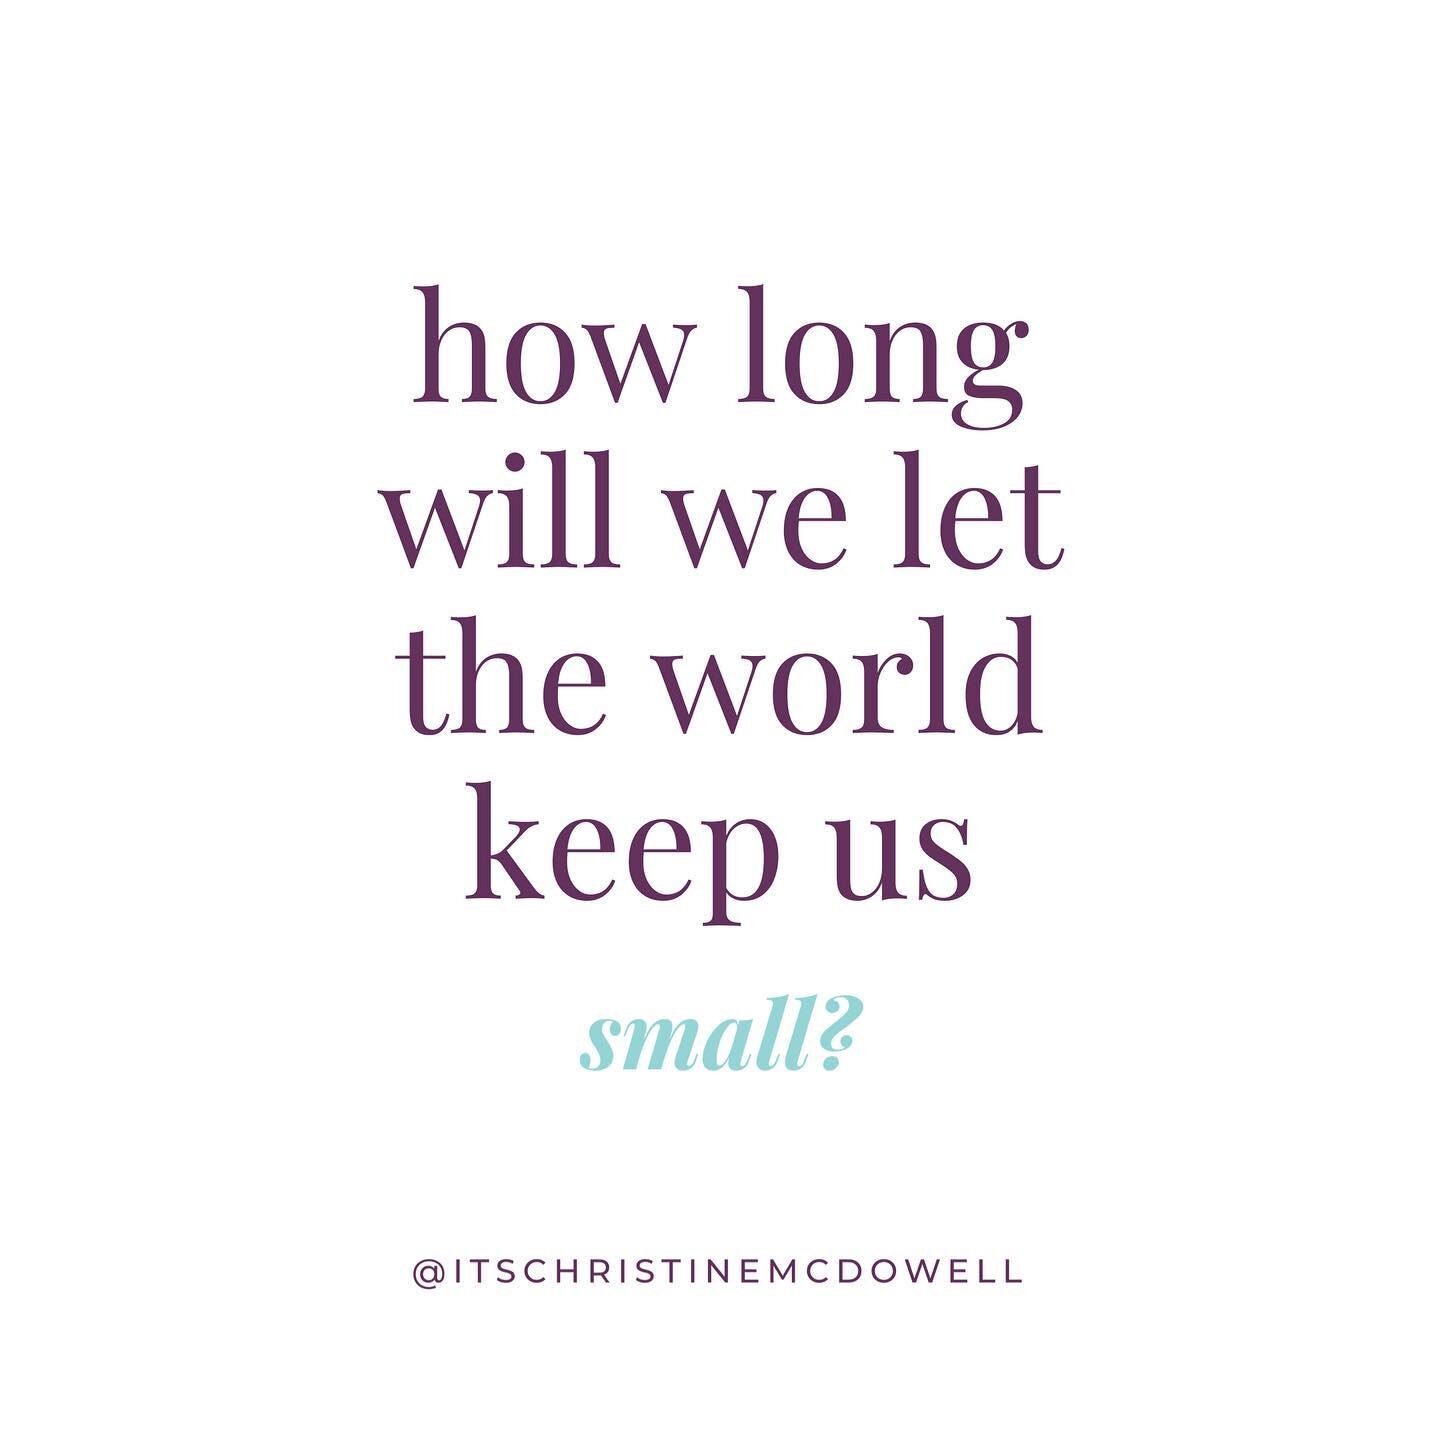 How long will we let the world keep us small?

how long will we let them cheer for us when we shrink, but stay silent when we take up space?

how long will we be led to believe that weight loss is the only worthy fitness pursuit?

when will we rememb